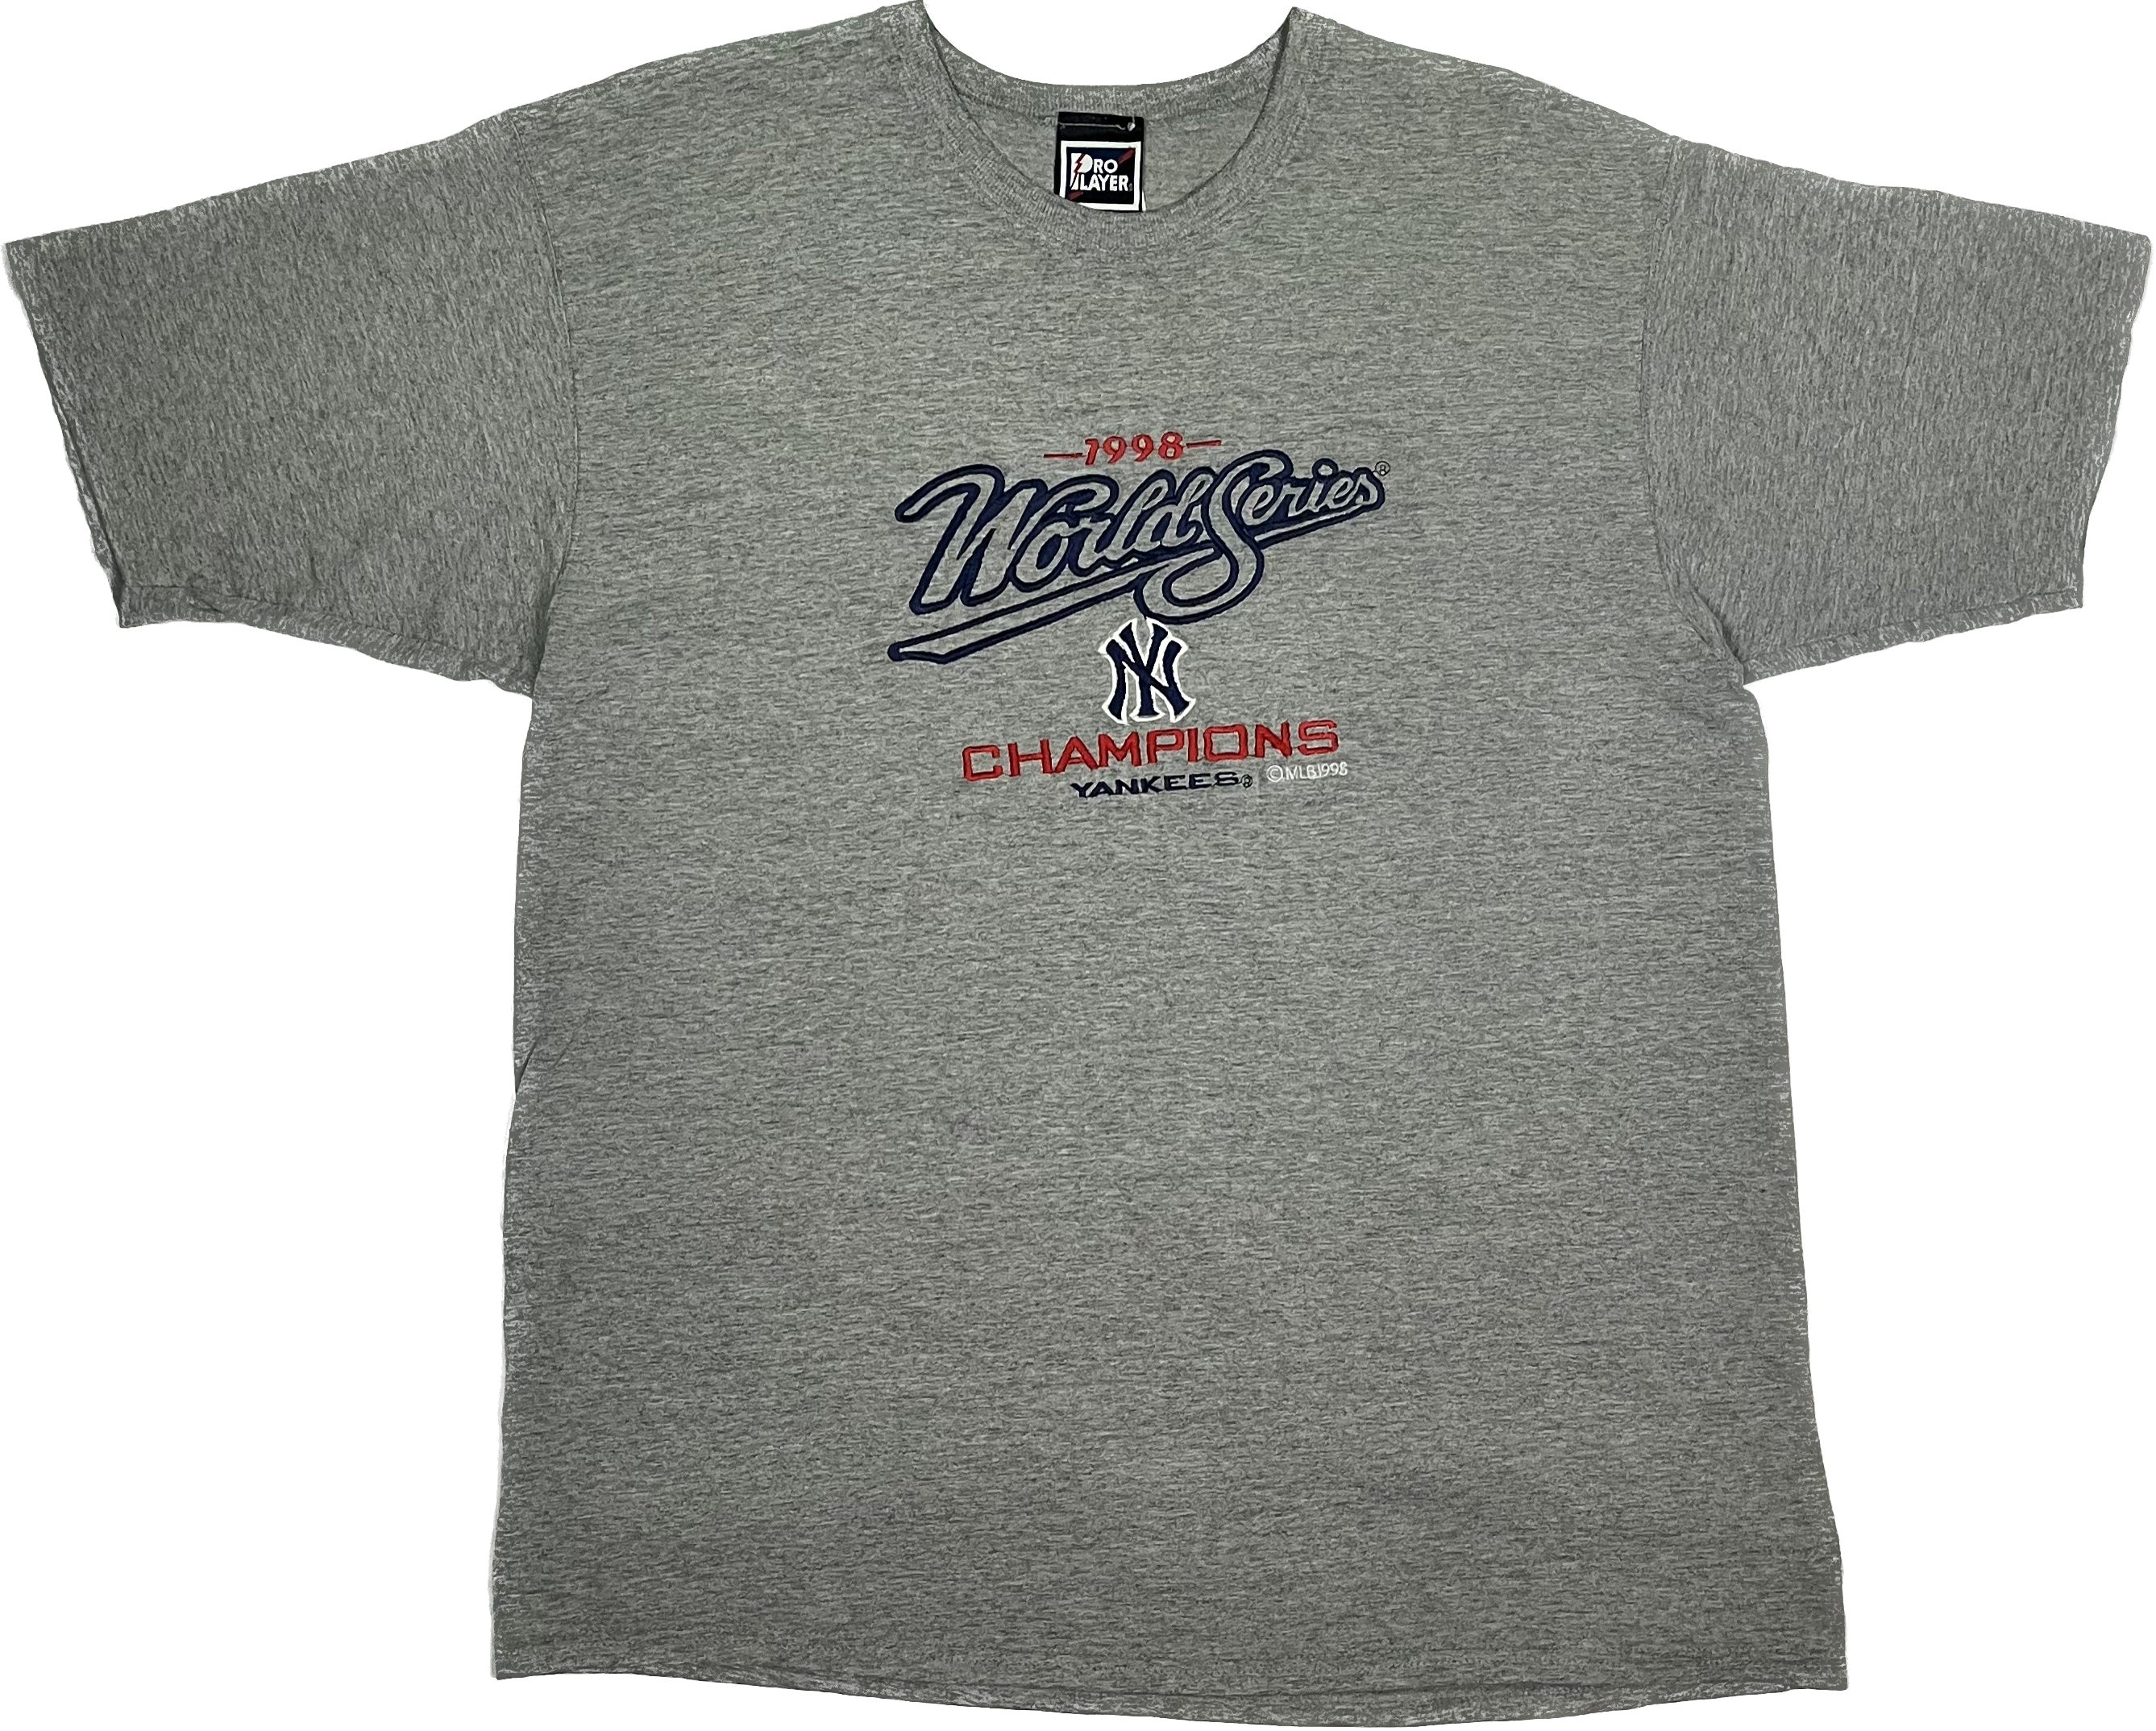 Vintage New York Yankees Jersey inspired T-Shirt XL Y2 – Scholars & Champs